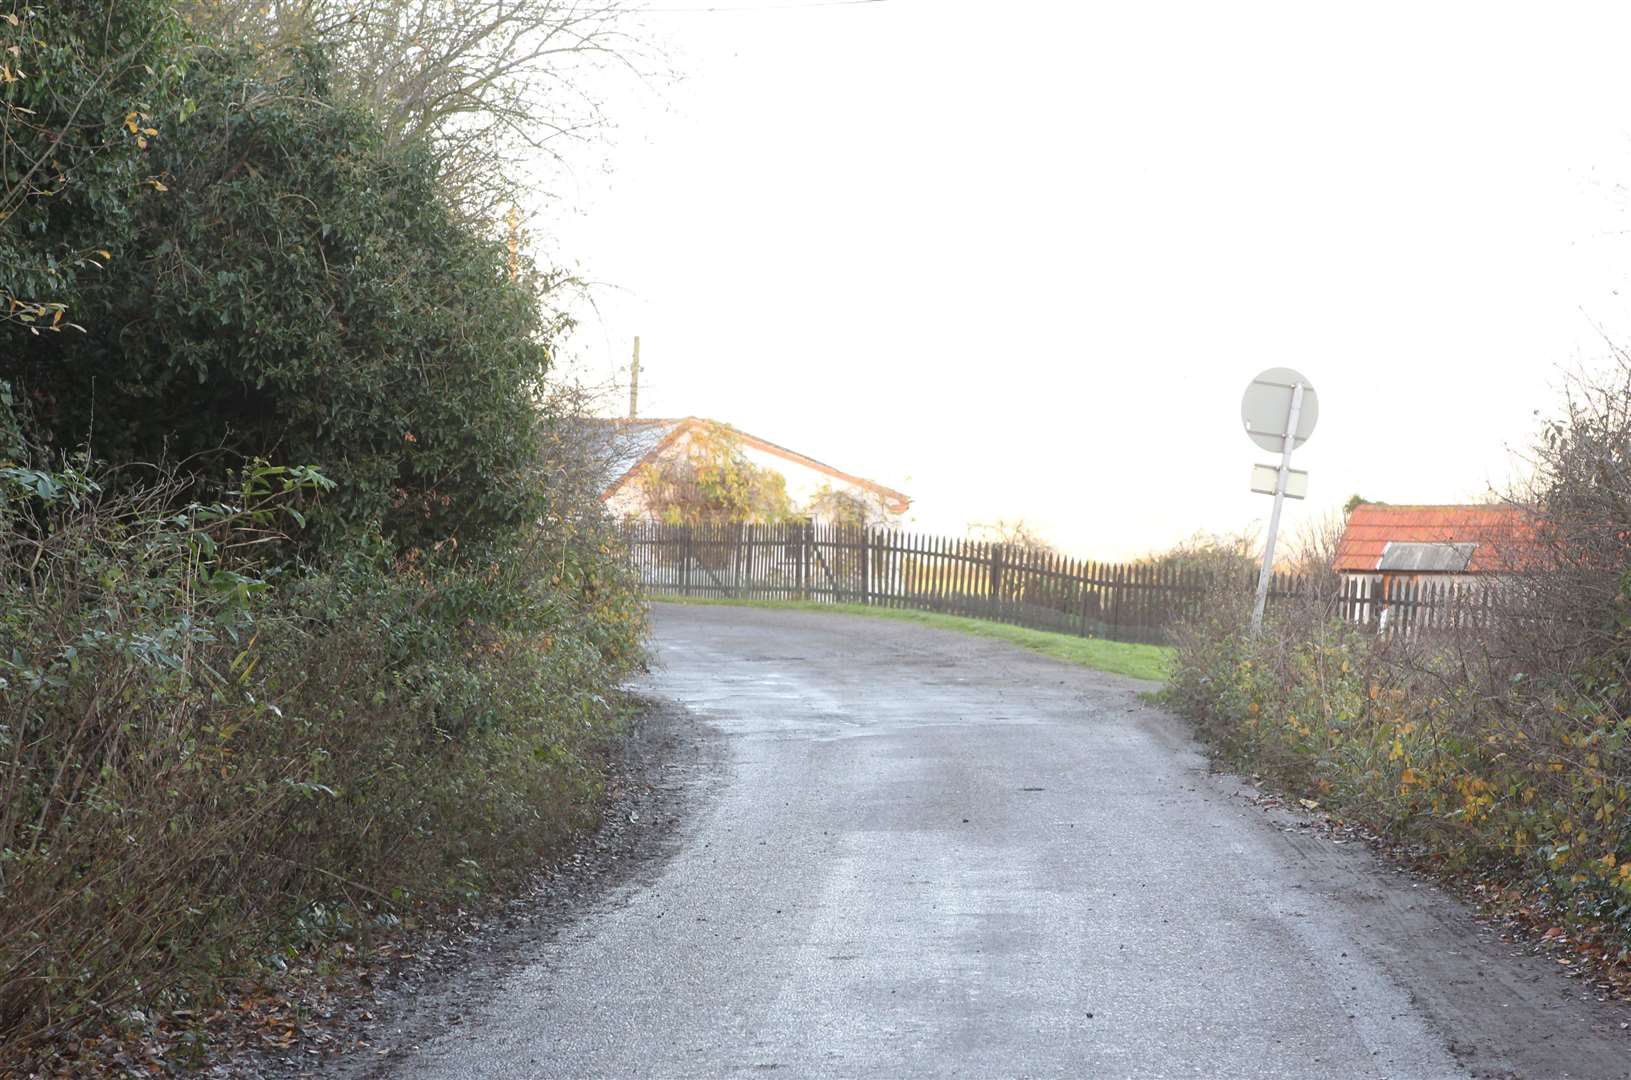 The road to the Nuralite industrial estate/entrance. Picture: John Westhrop